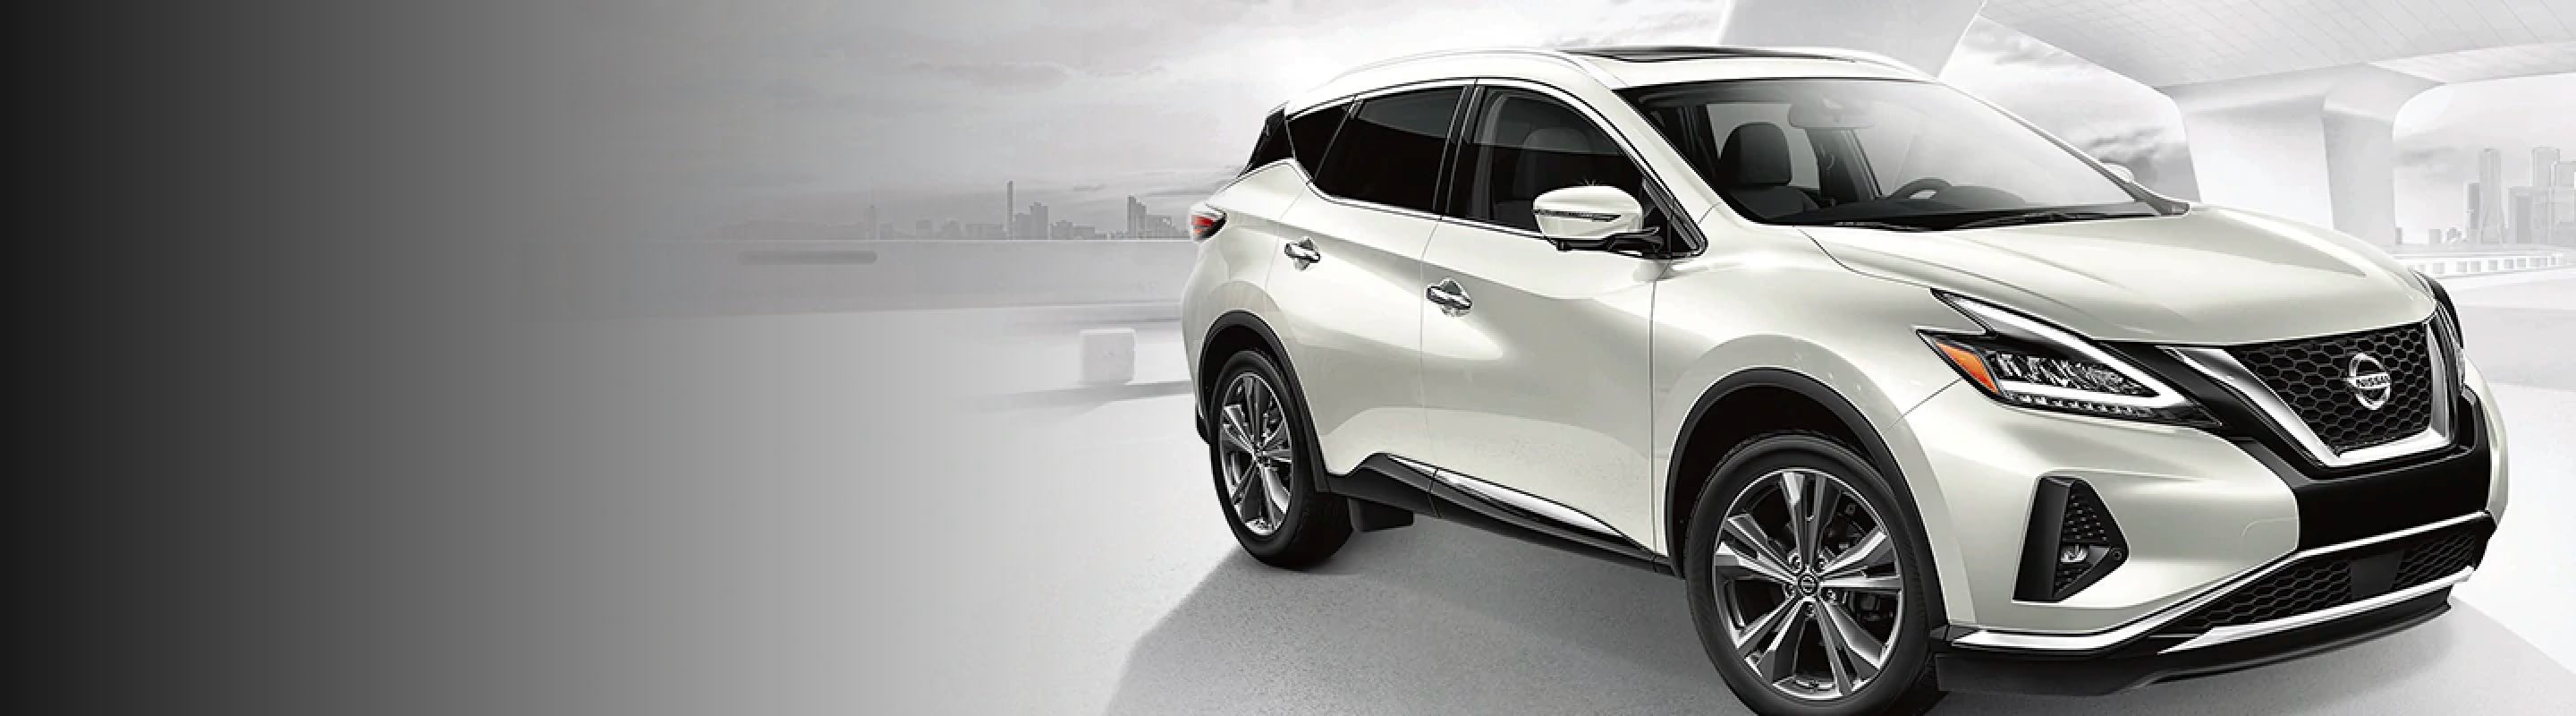 2021 Nissan Murano Colors, Price, Trims | Milford Nissan